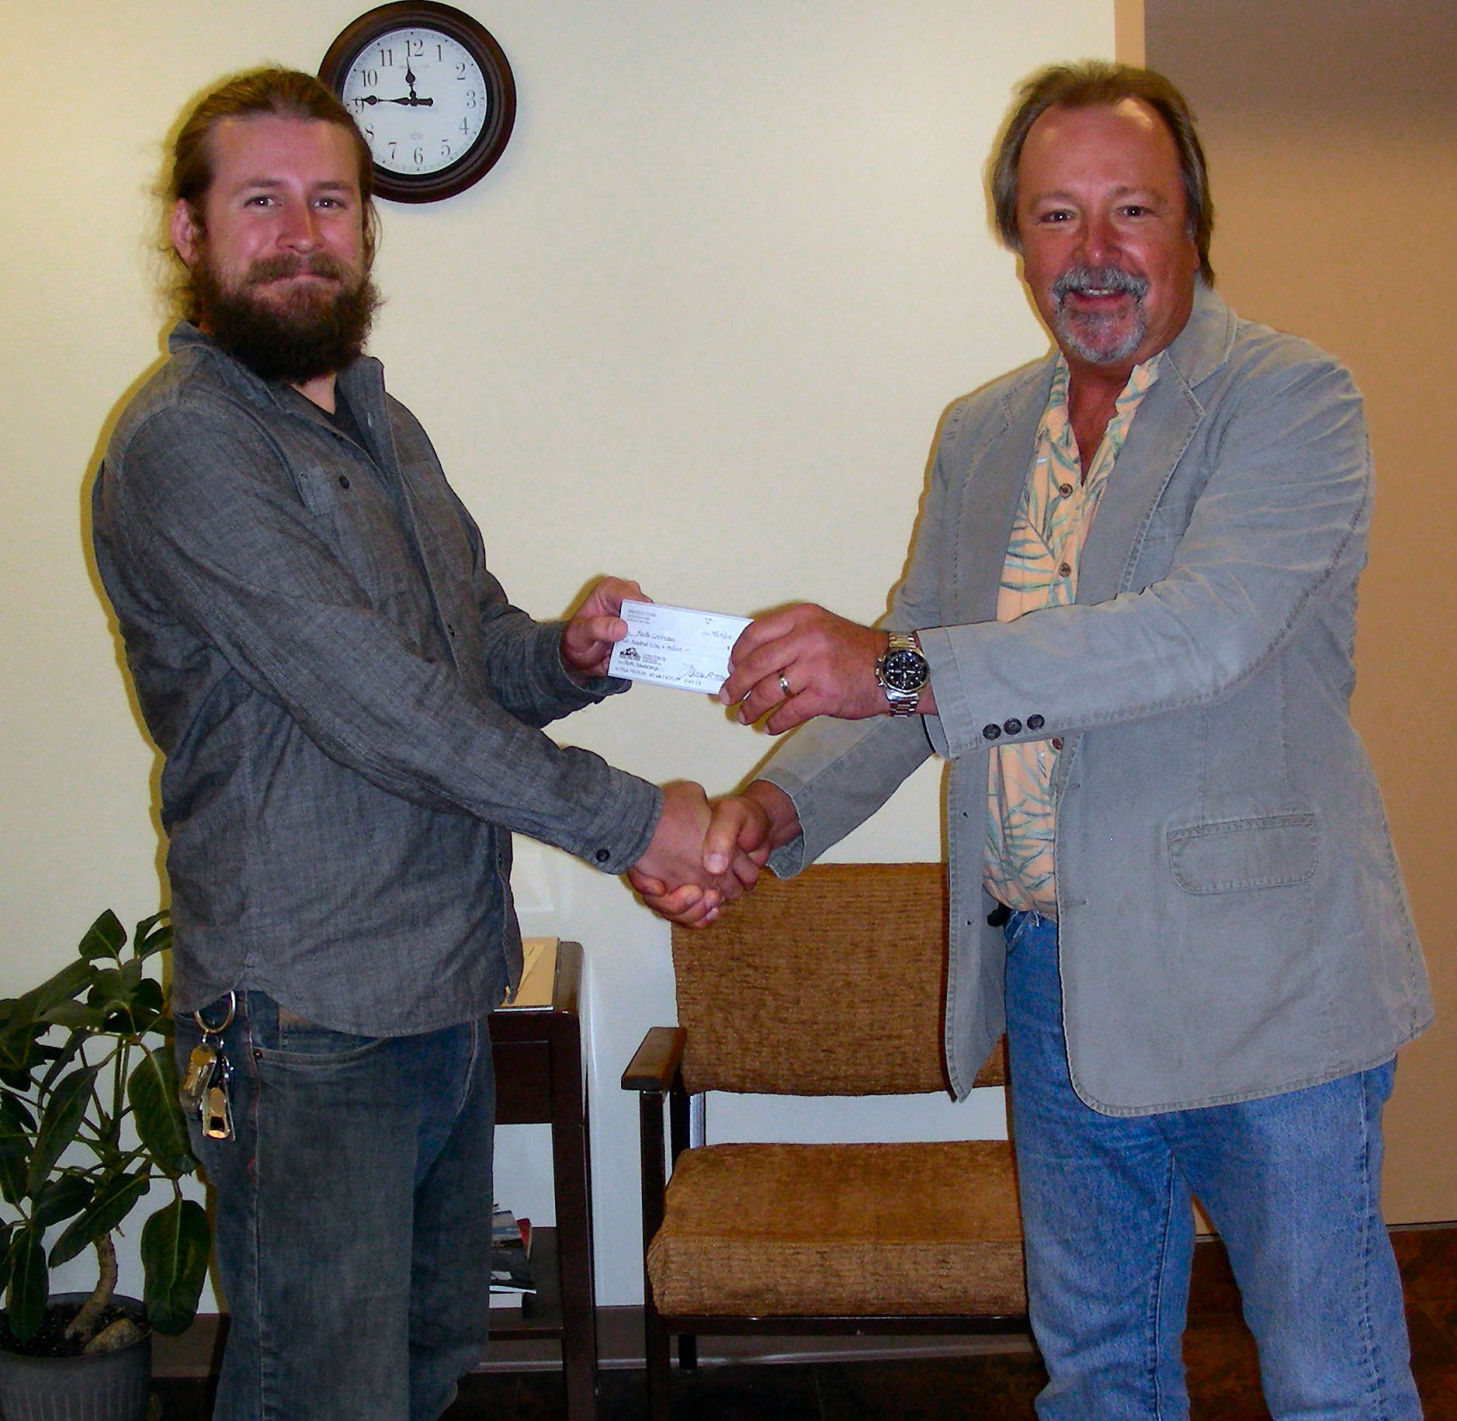 BHSU student receives SD Archaeological Society award for student service